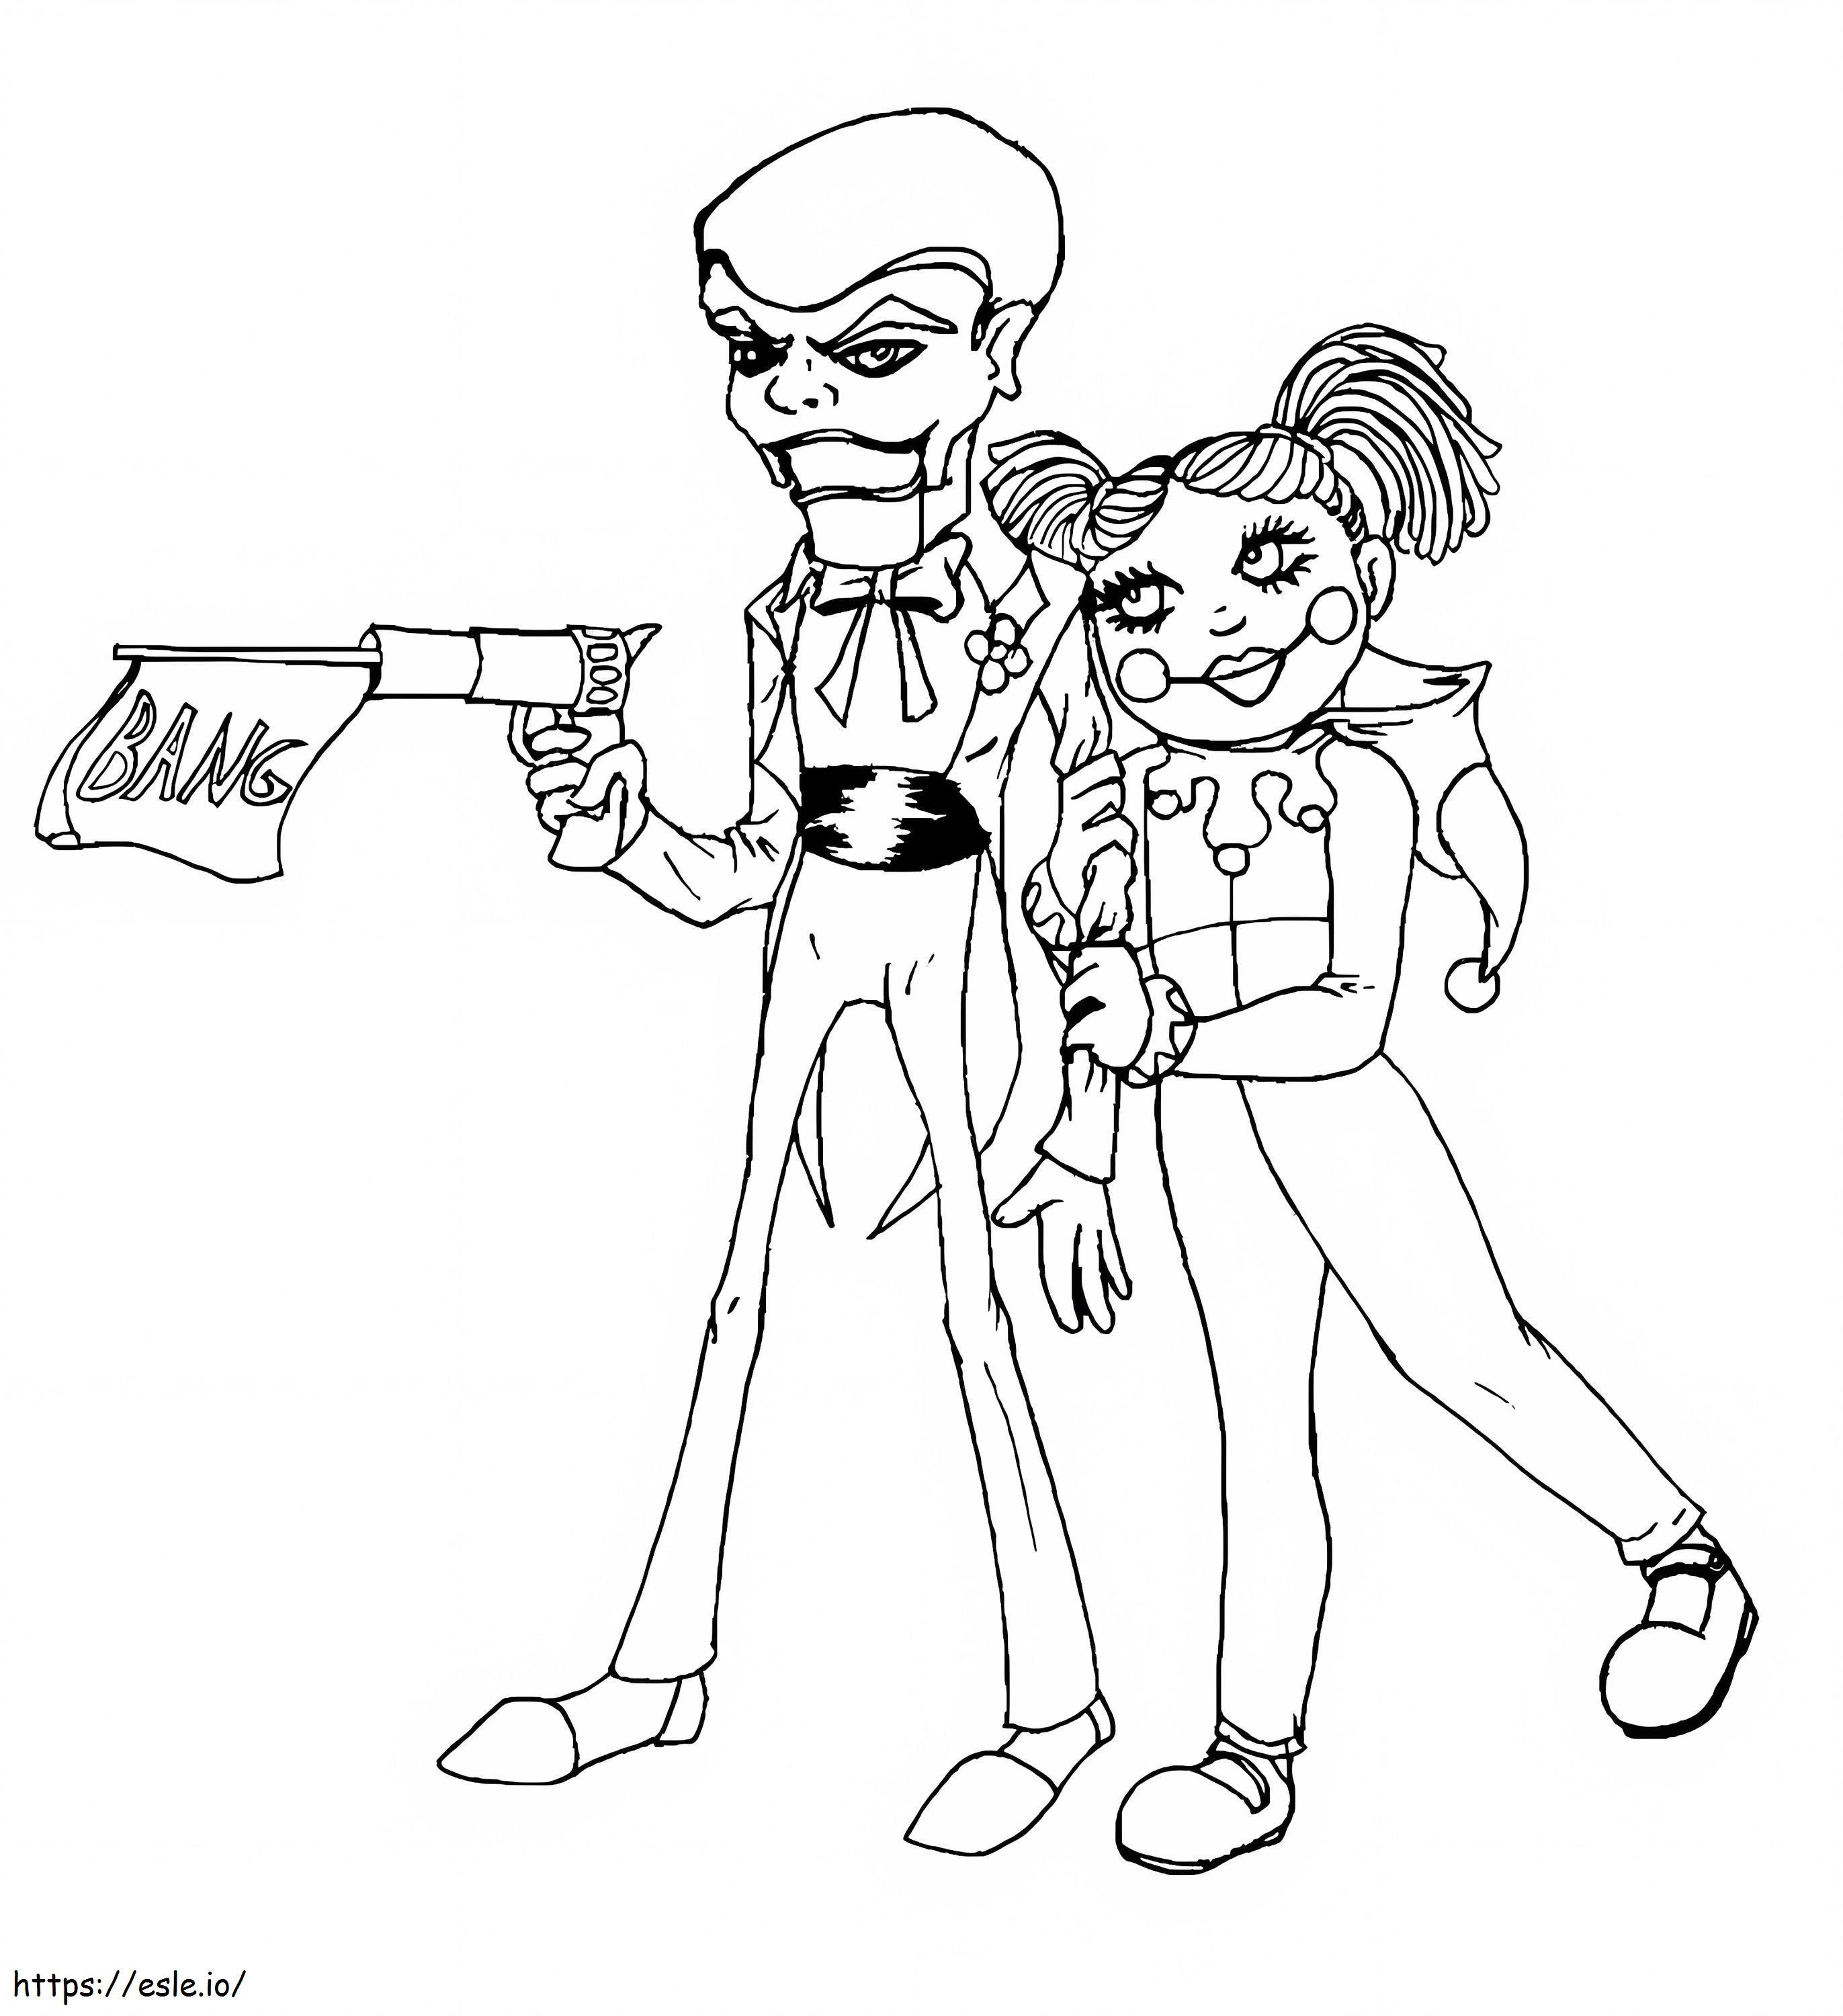 Slappy 2 coloring page